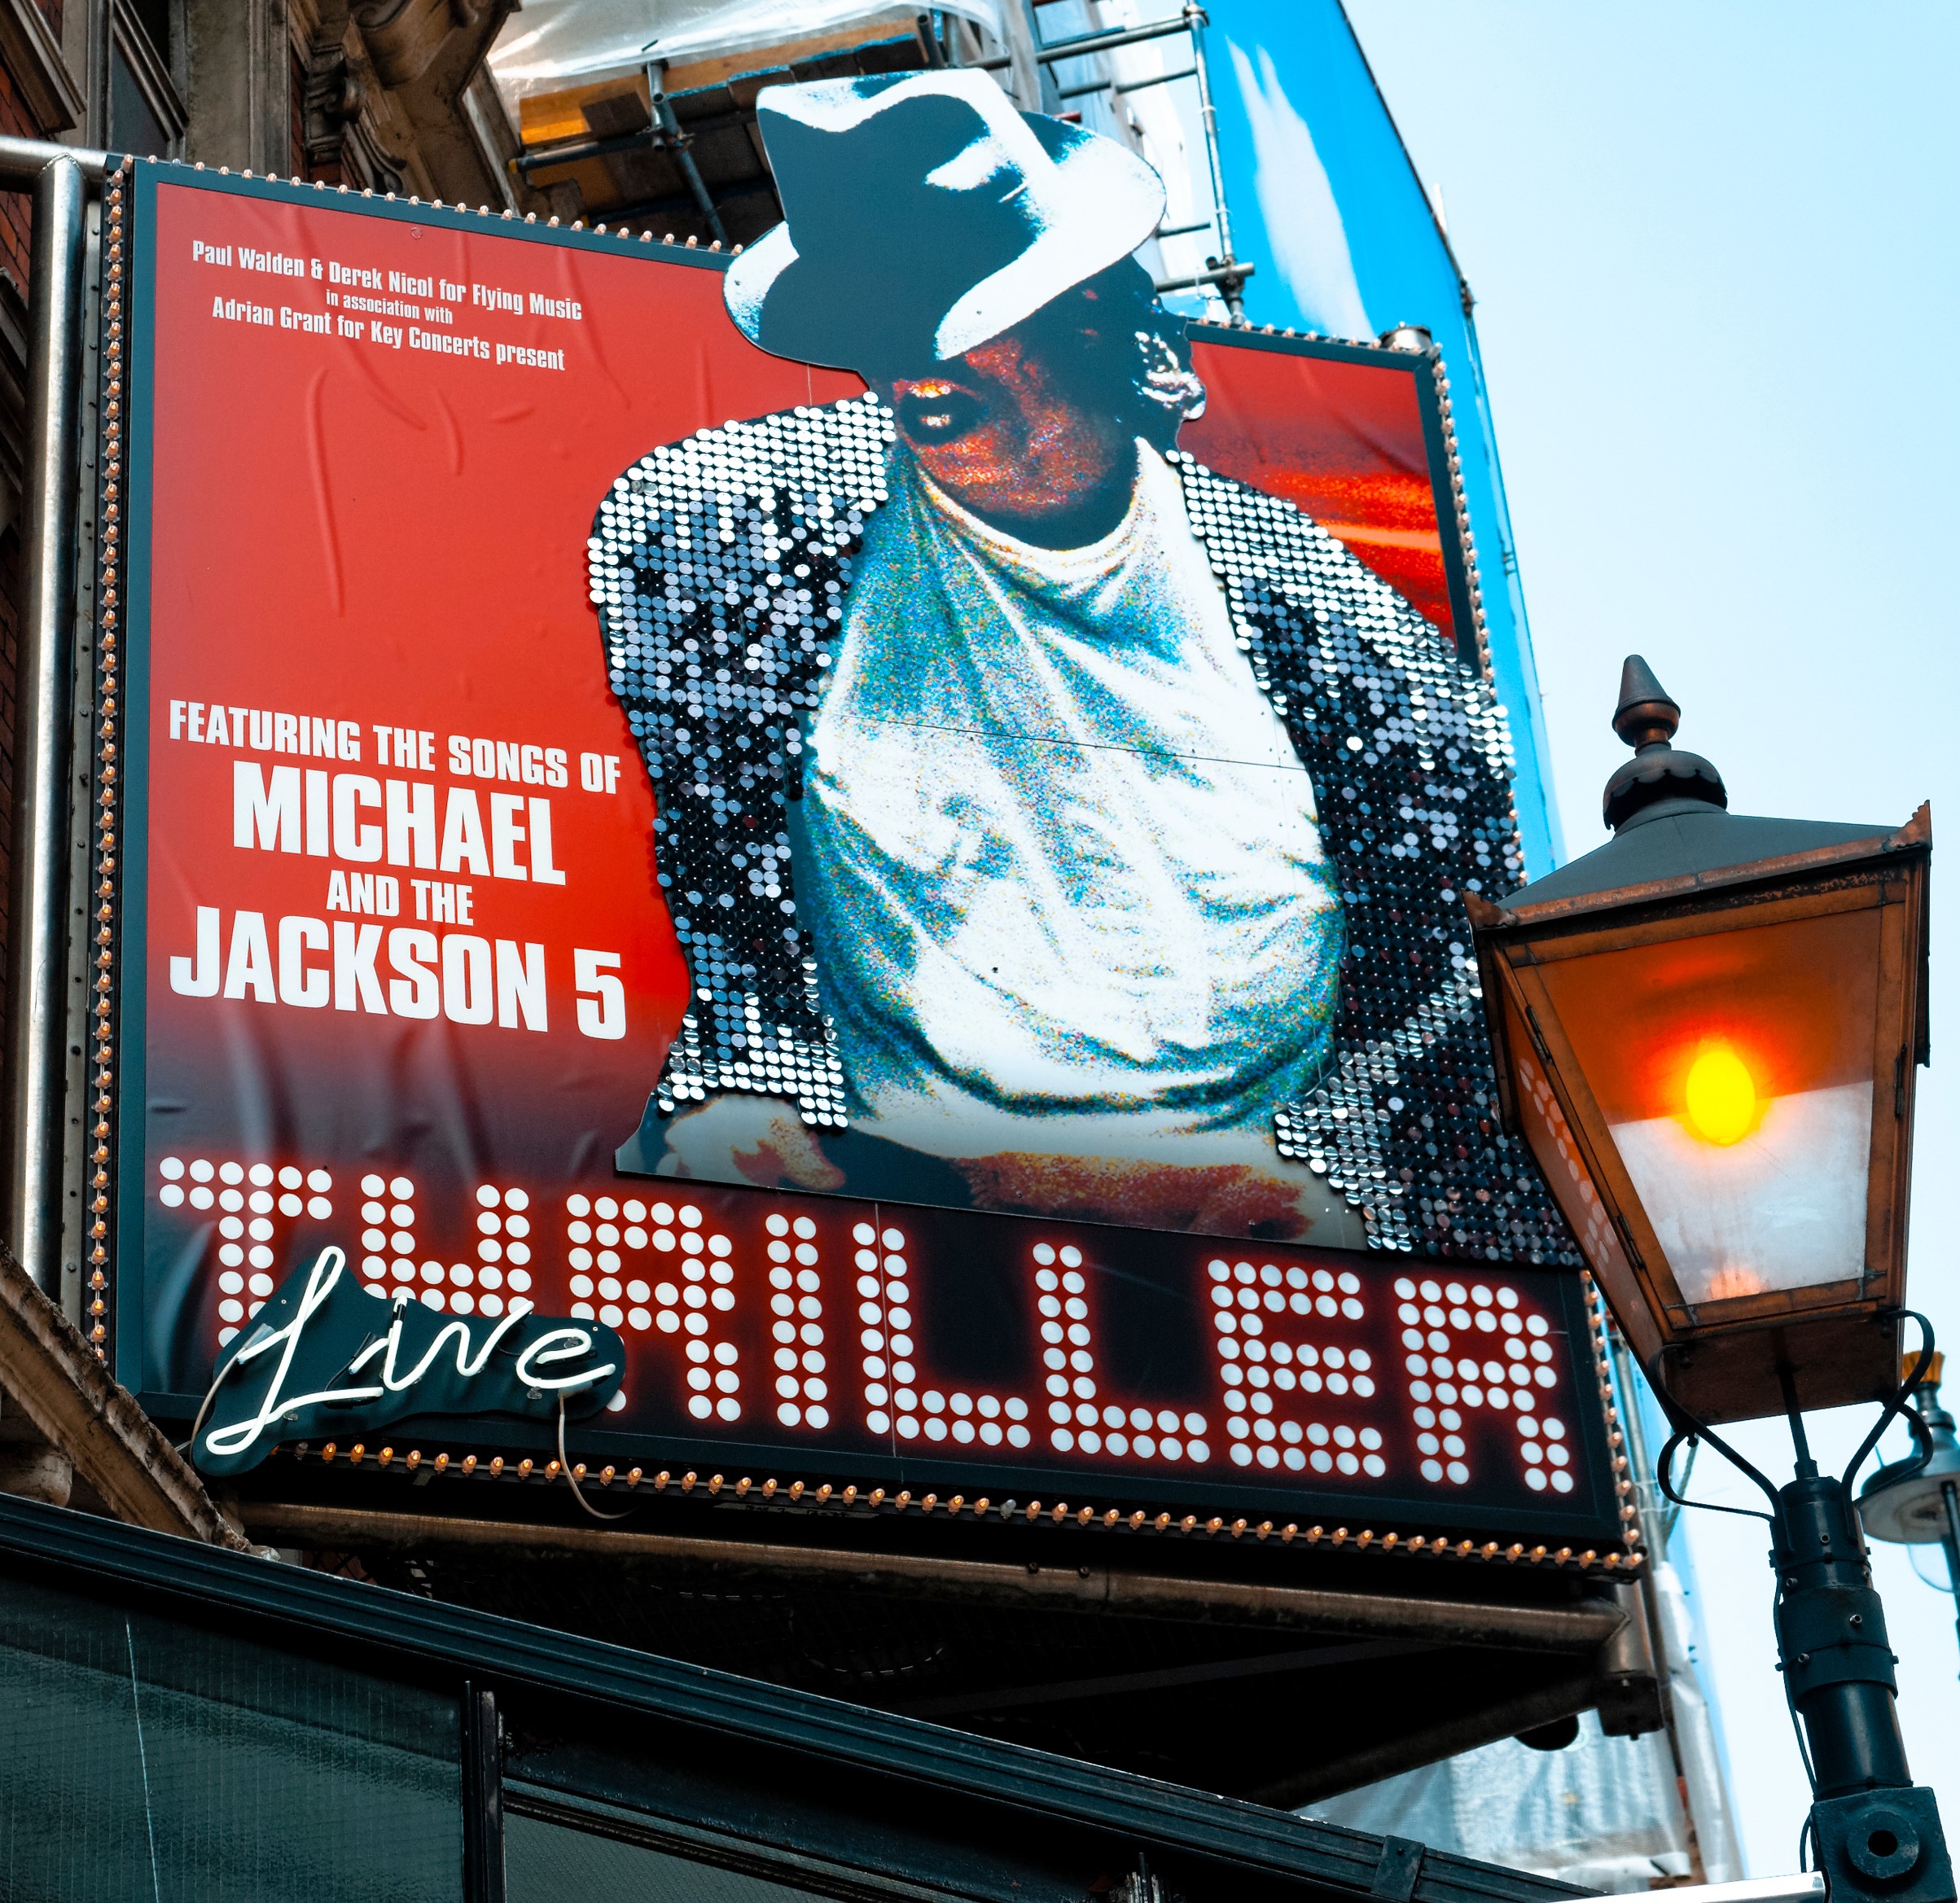 You are currently viewing “Thriller Jacksona – ma już 40 lat. (01.12)